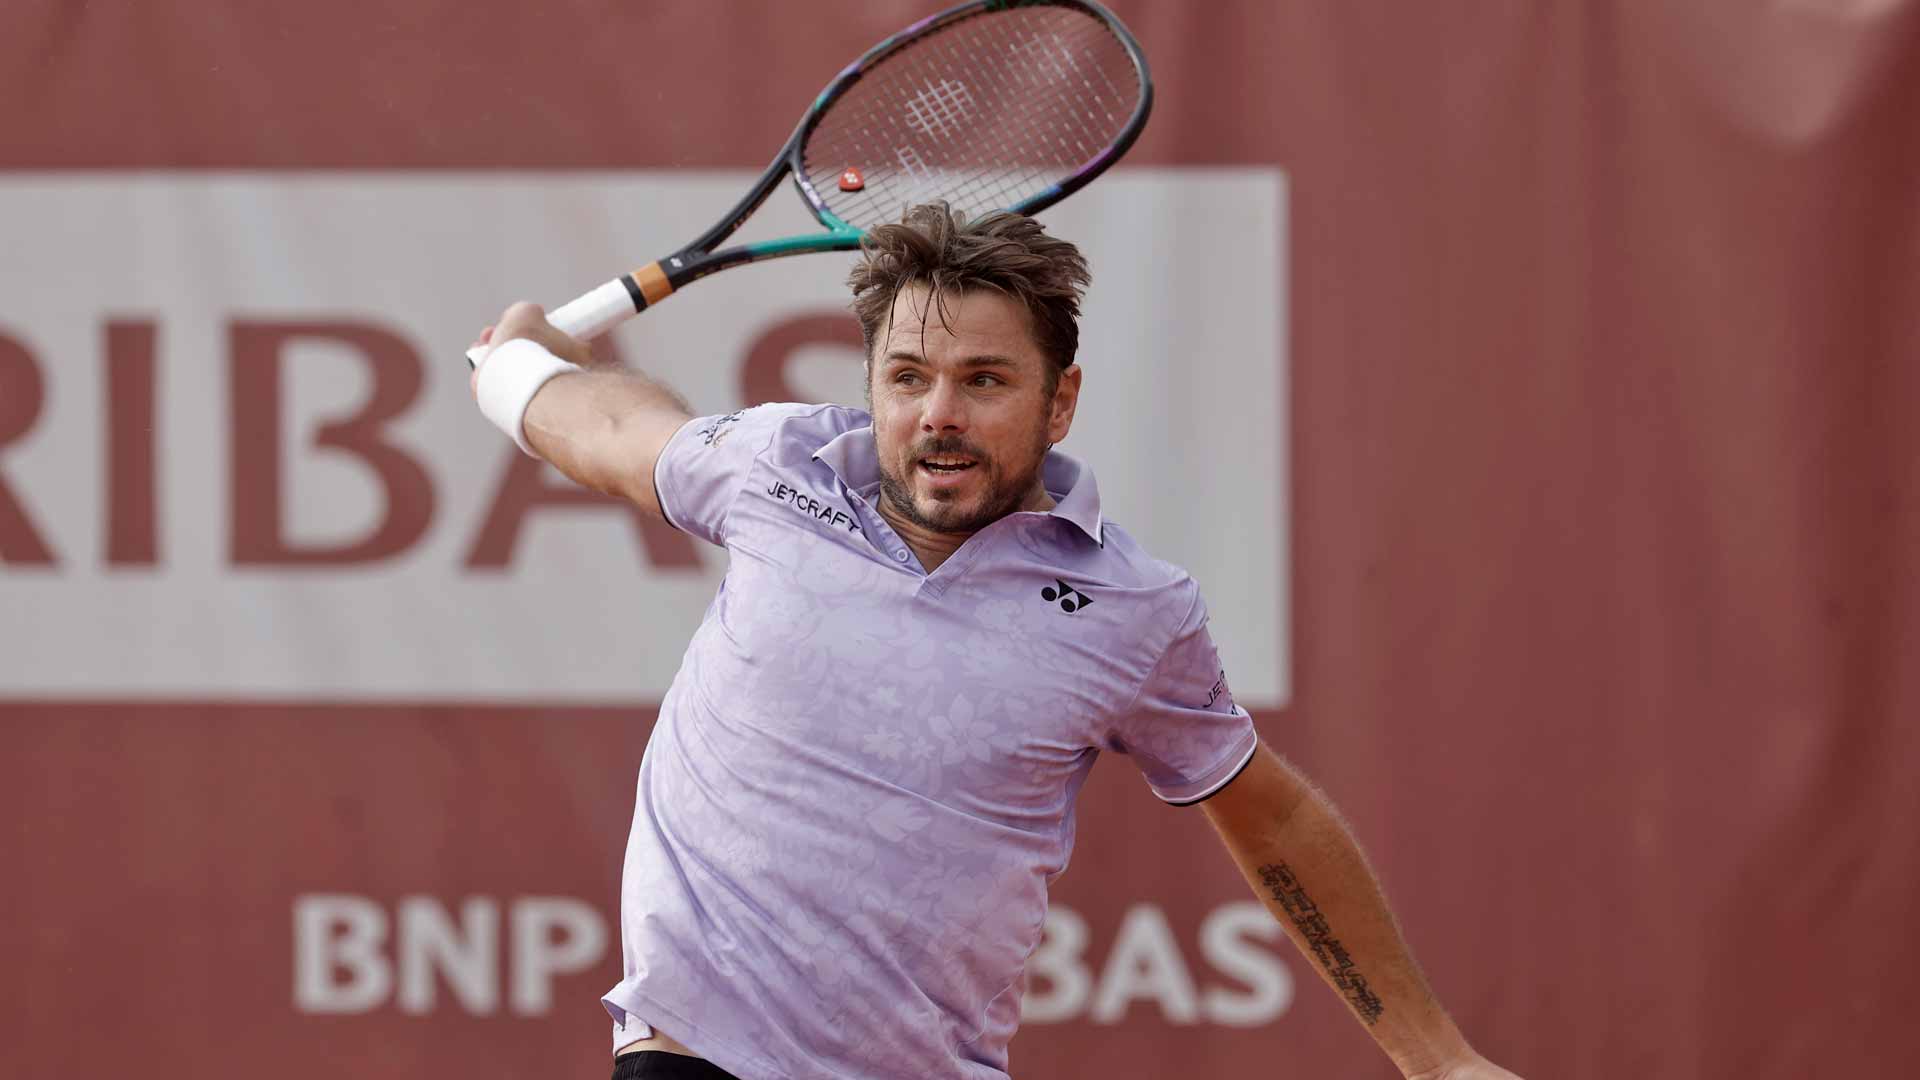 Stan Wawrinka in action at the Bordeaux Challenger.